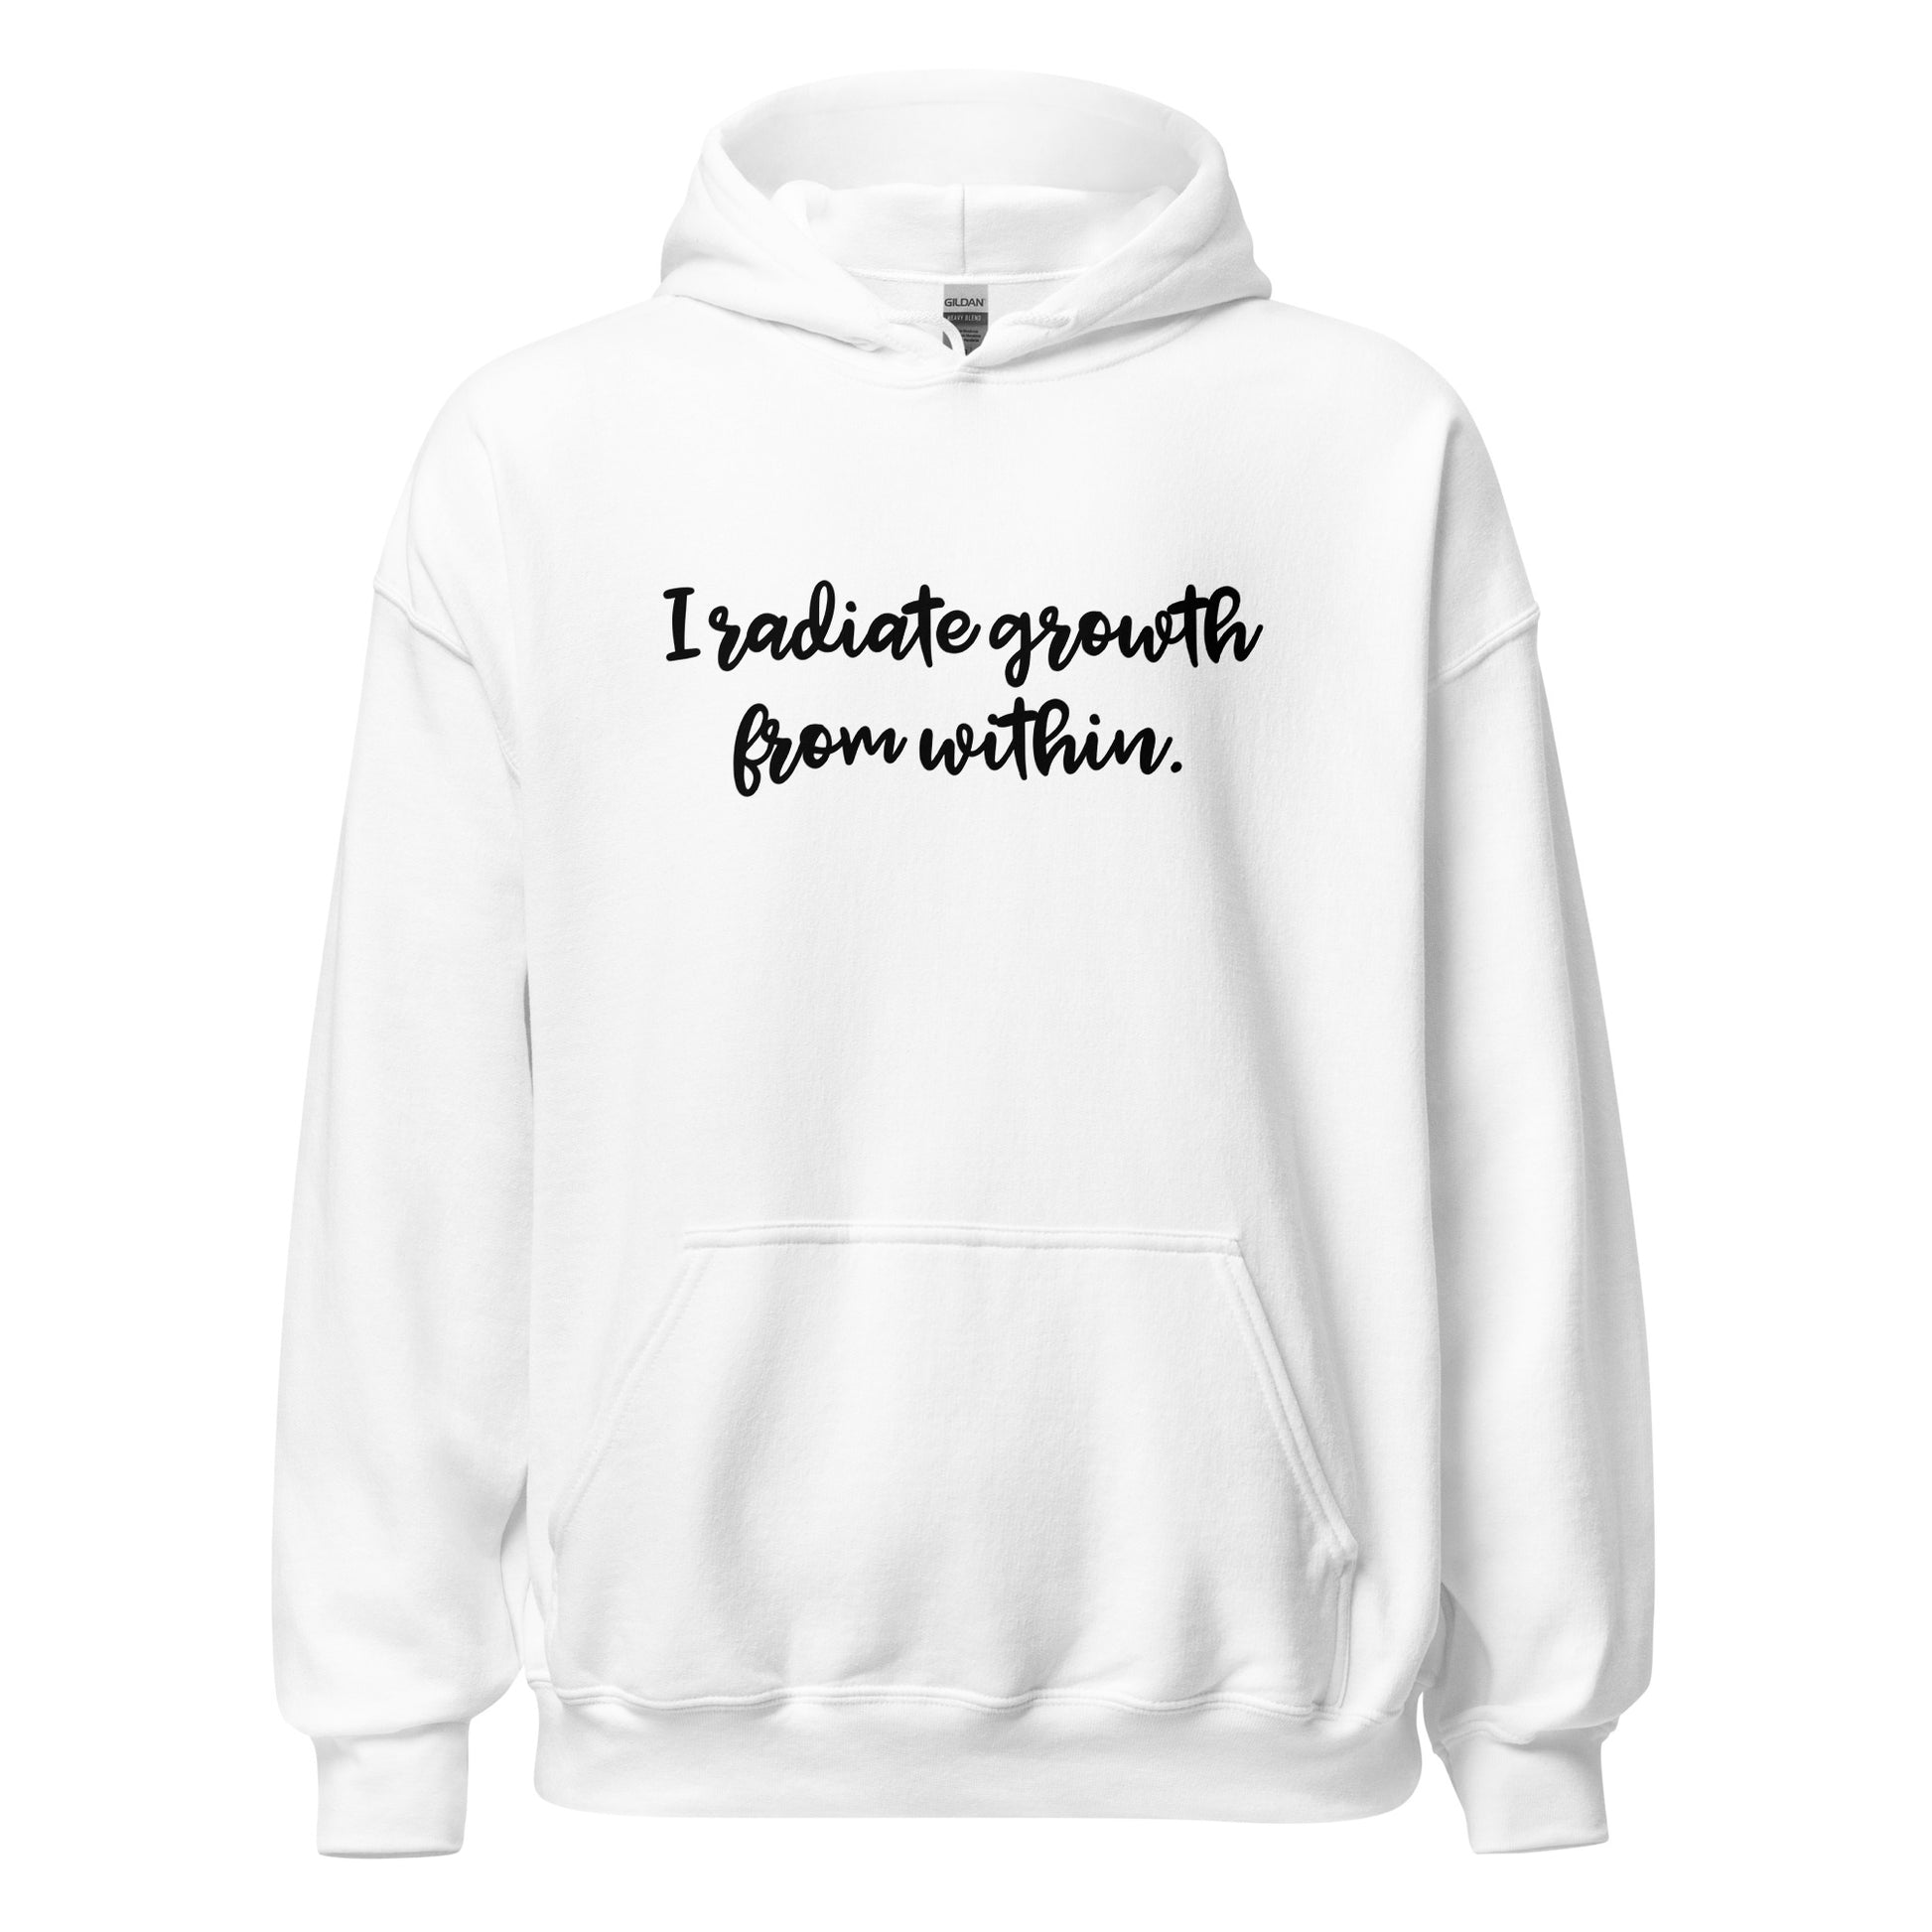 I radiate growth from within - Hoodie